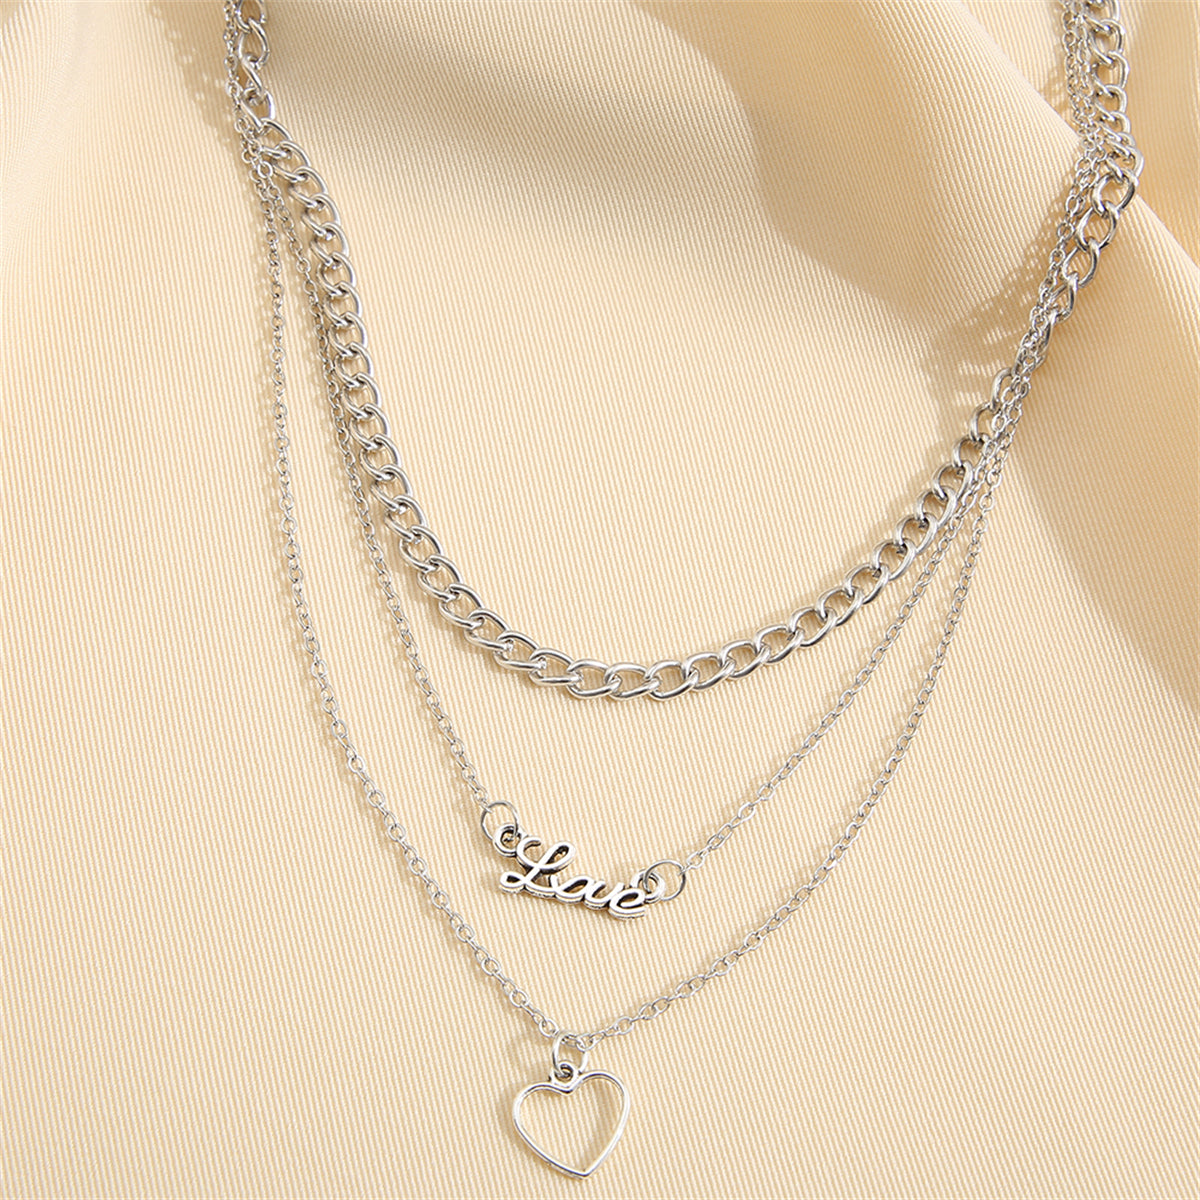 Silver-Plated 'Love' Heart Pendant Layered Pendant Necklace